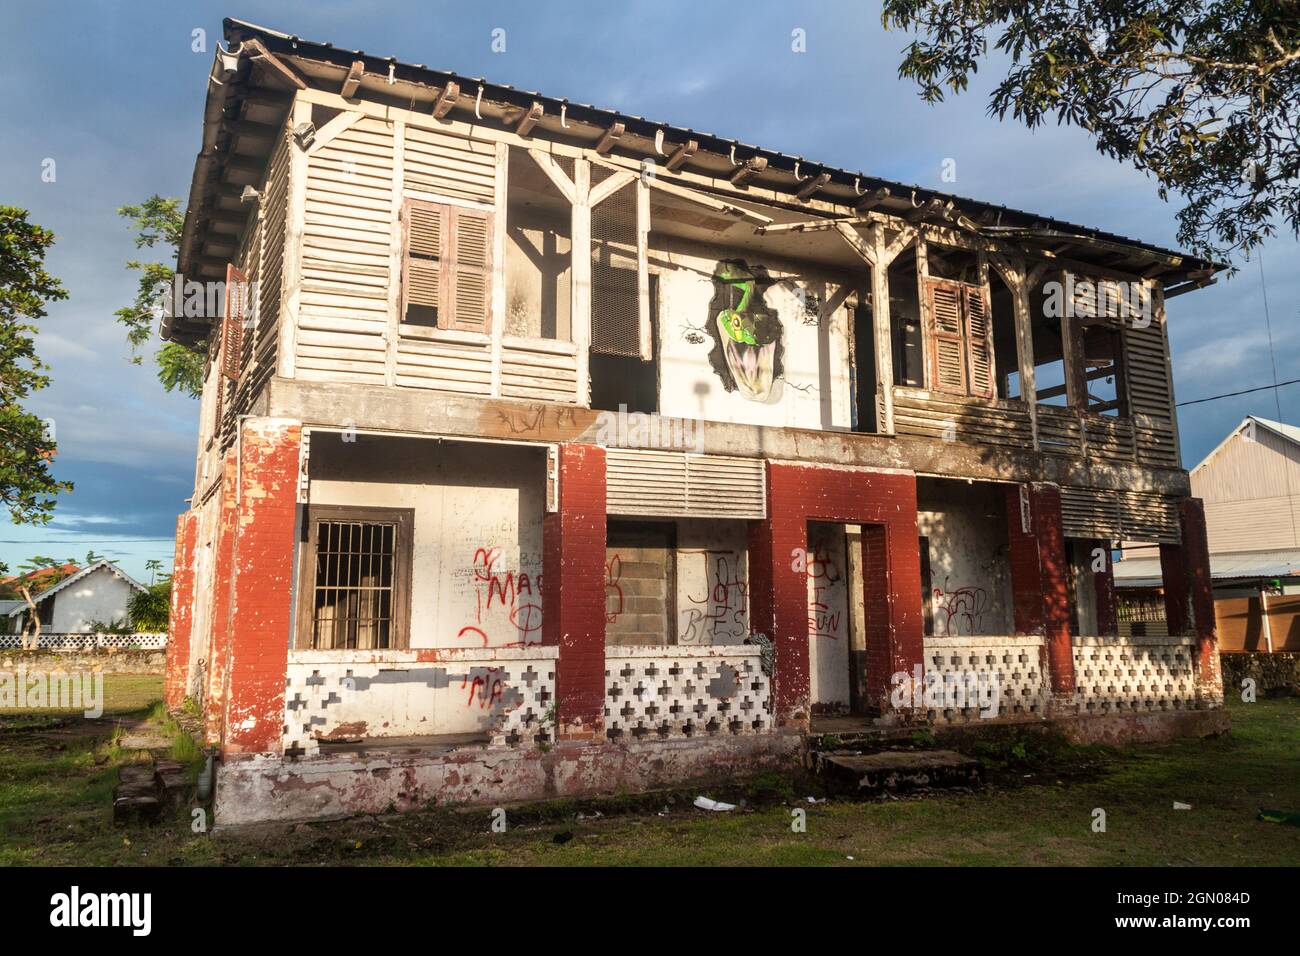 Abbandoned building in St Laurent du Maroni, French Guiana. Stock Photo